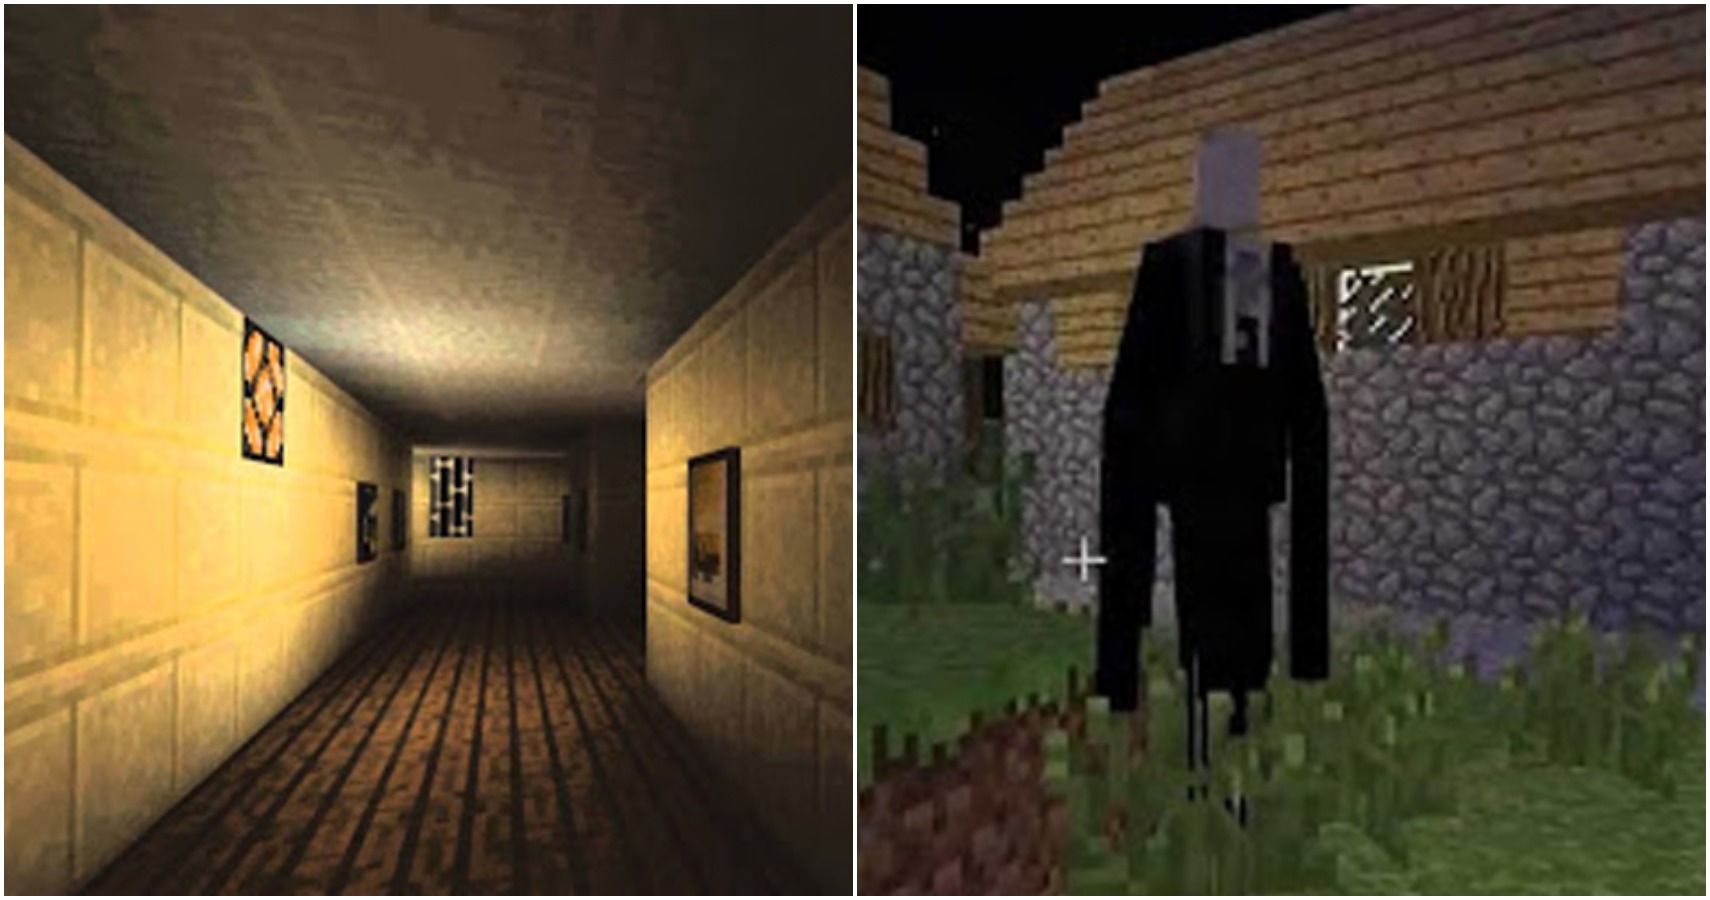 Minecraft Mod Adds Incredible Biome-Specific Designs for Endermen